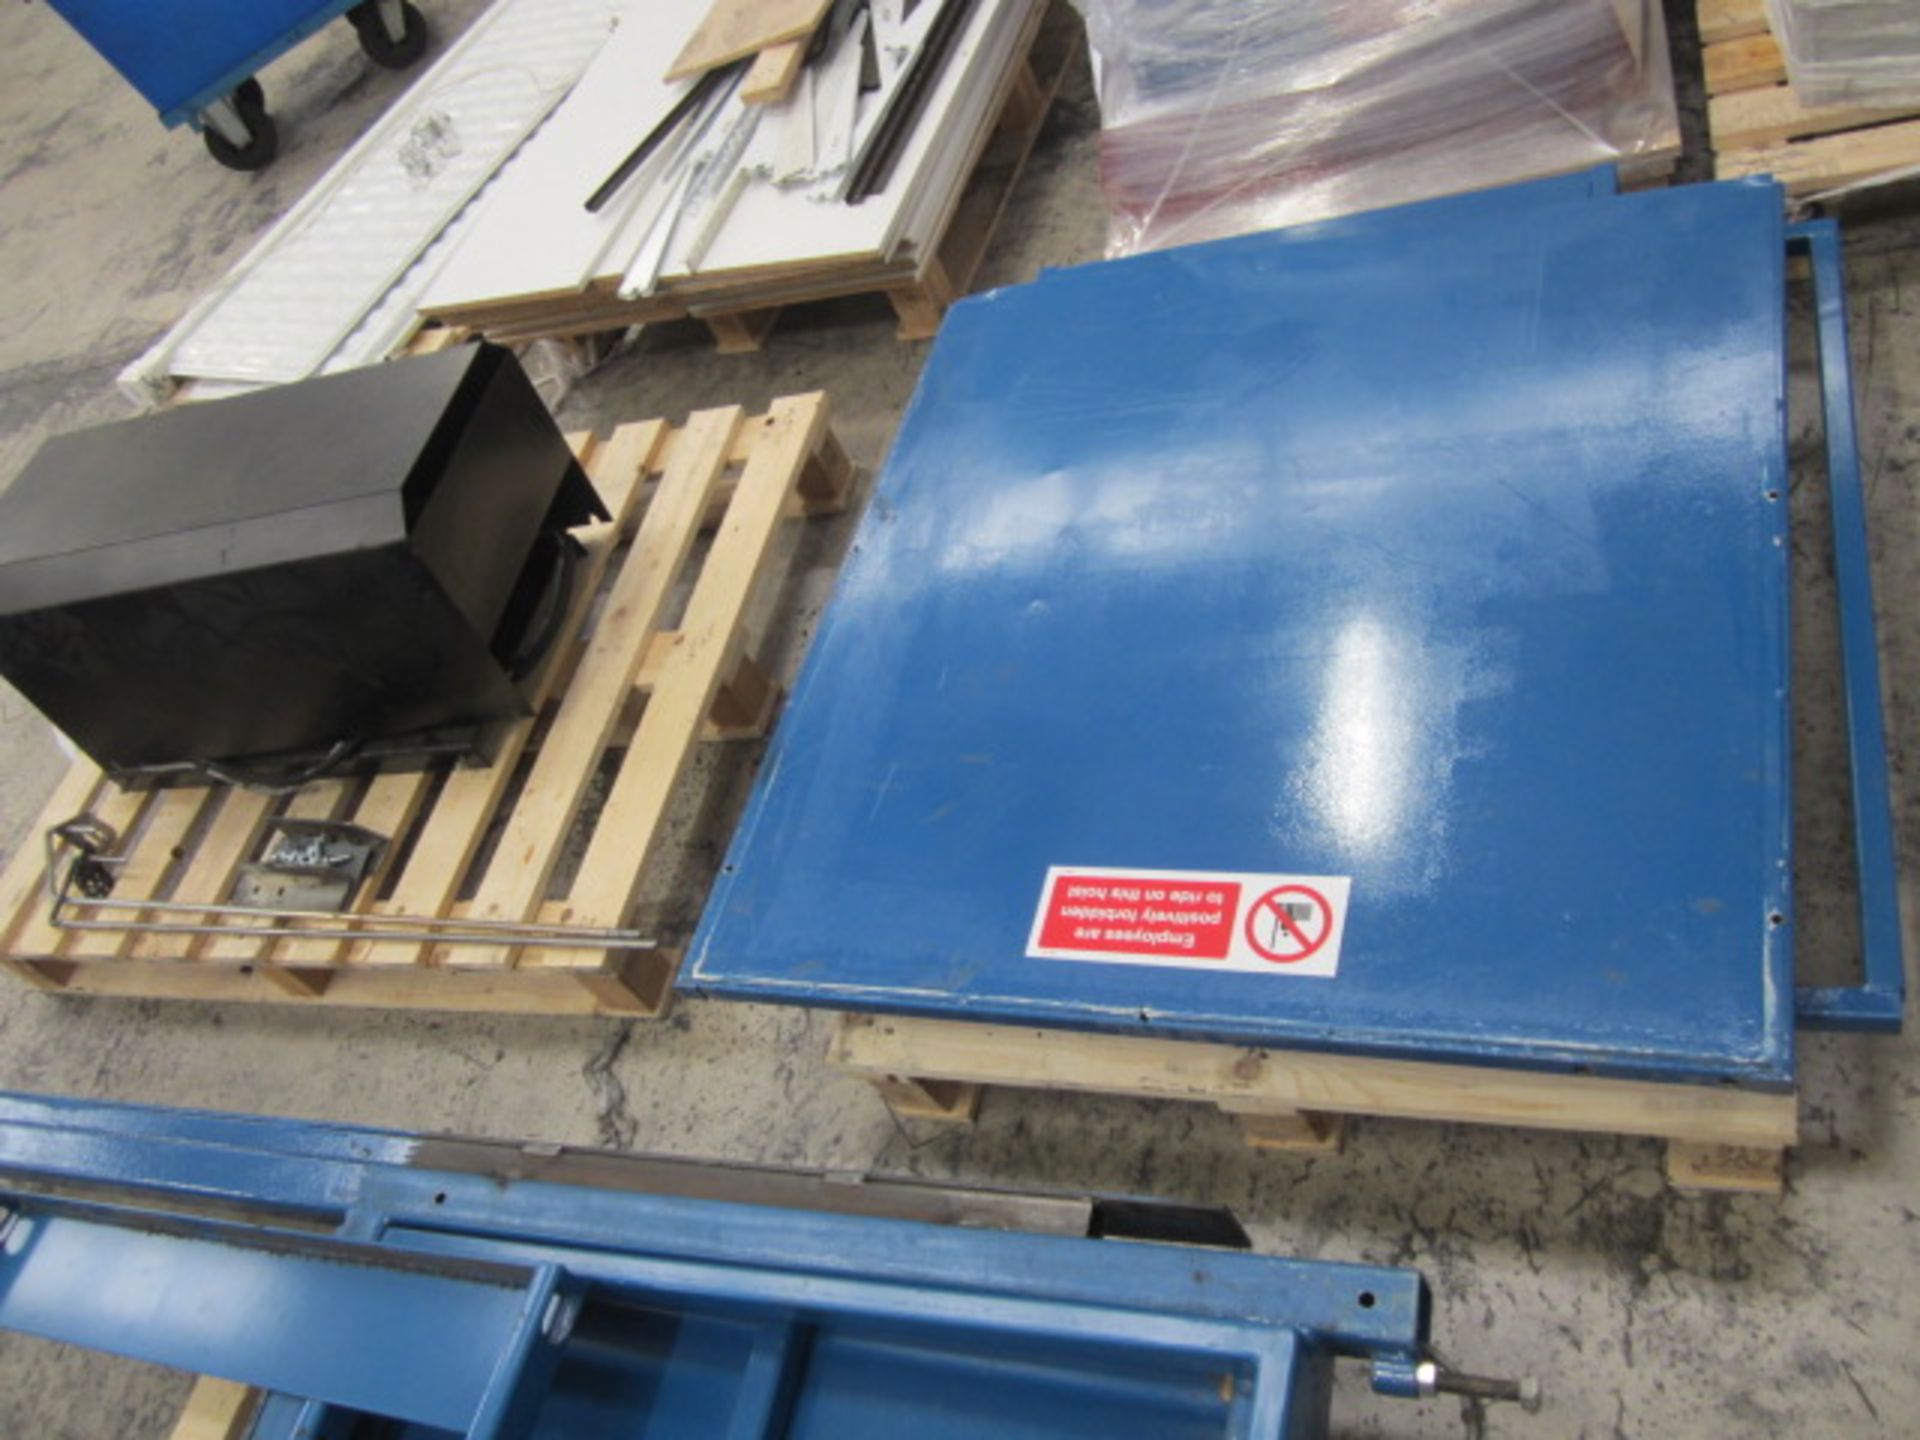 Saxon hydraulic lift table, approx. table size 1.9m x 1m with smeshed side, SWL 500kgs - dismantled. - Image 4 of 8